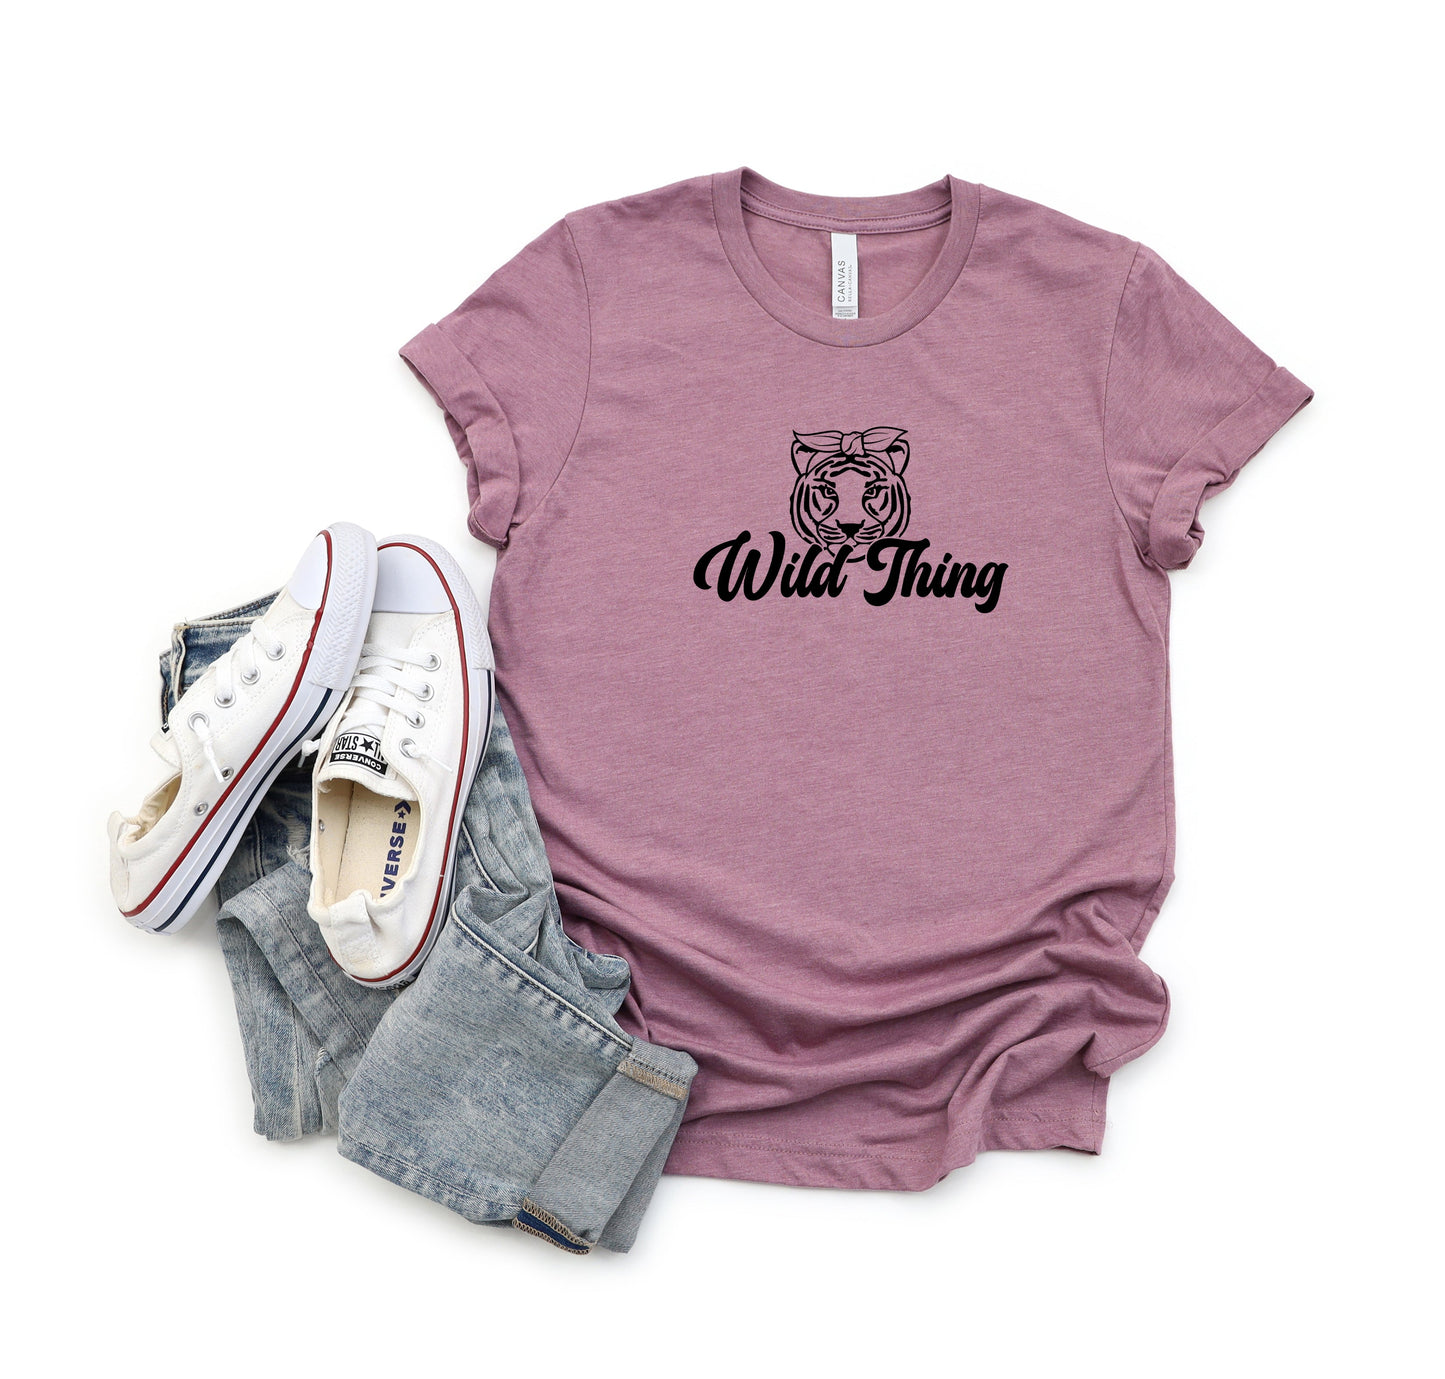 Wild Thing Tiger | Youth Short Sleeve Crew Neck